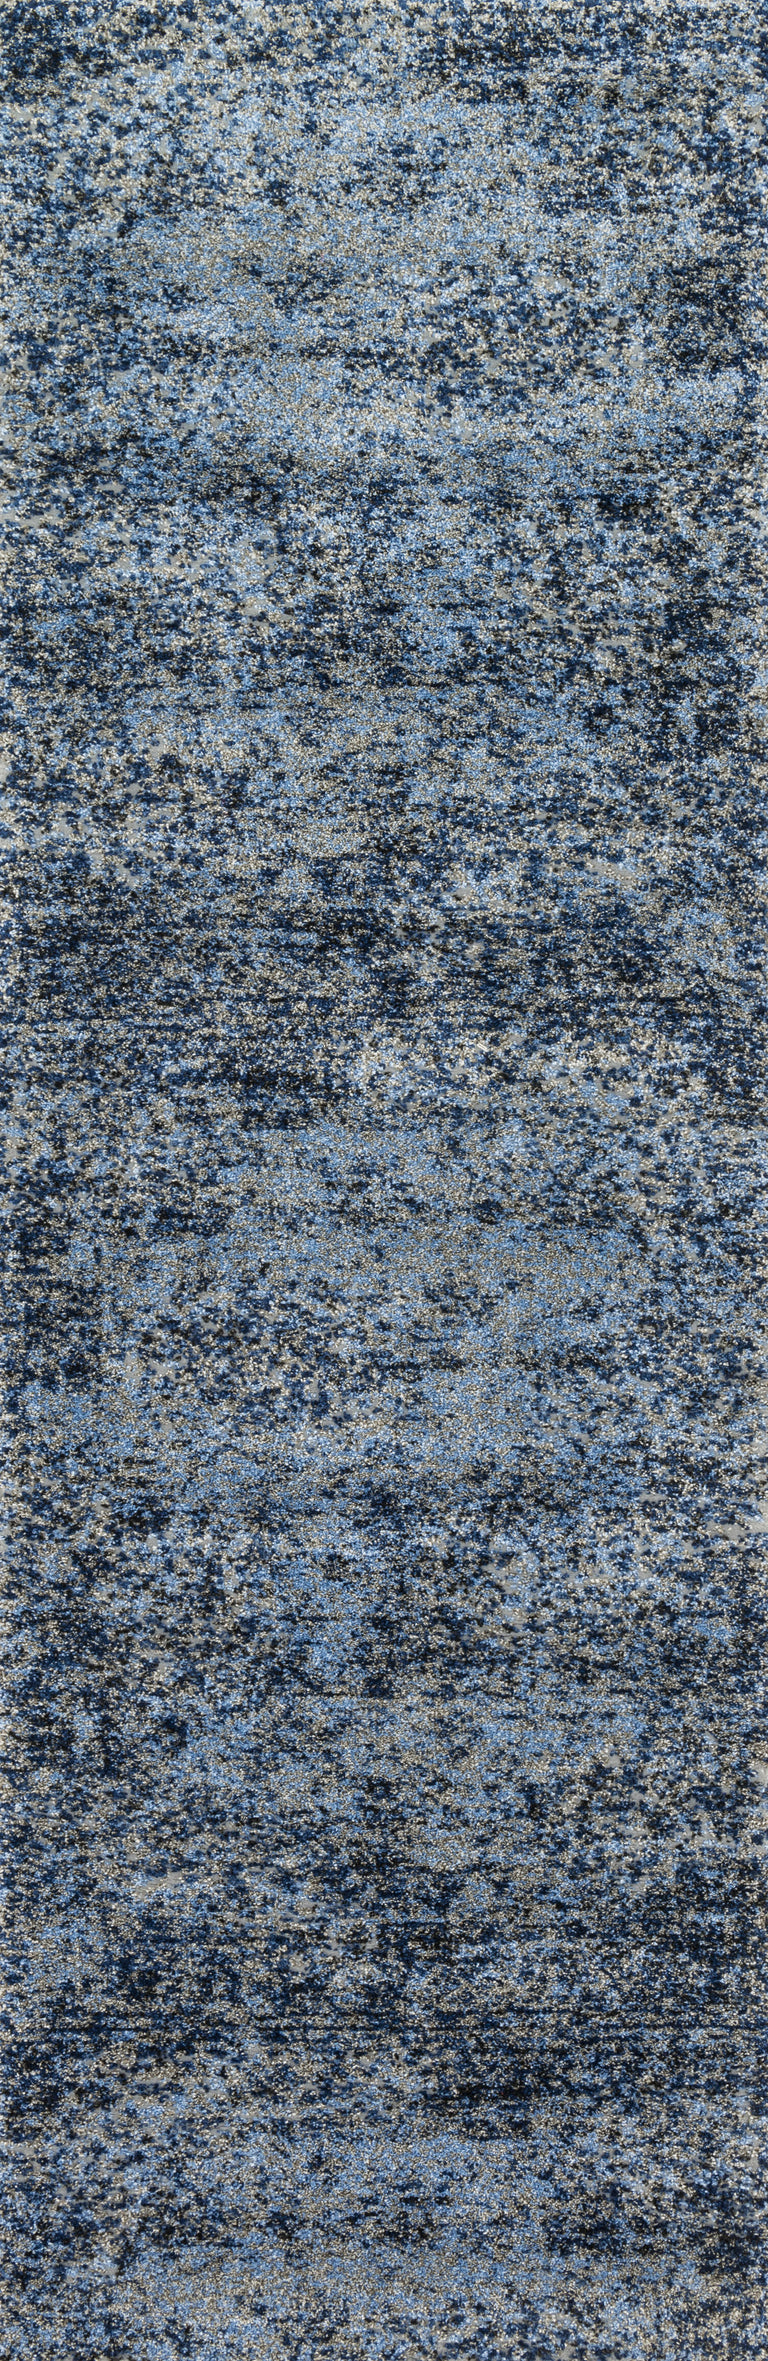 Loloi Rugs Viera Collection Rug in Lt. Blue, Grey - 7'7" x 10'6"